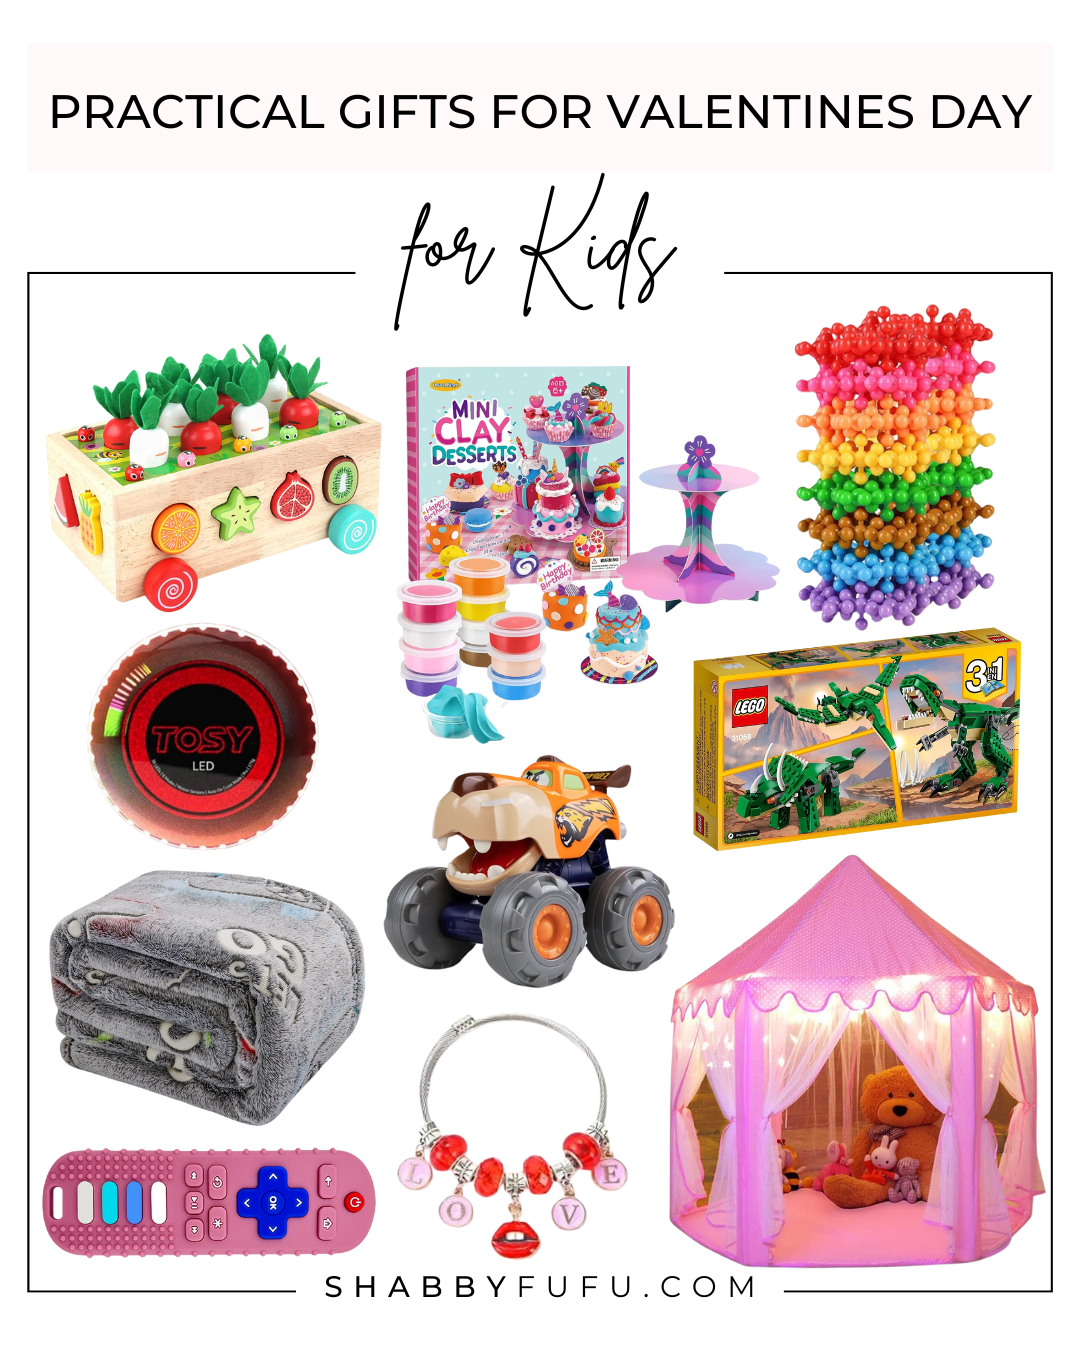 Collage of gift ideas titled "Practical Gifts For Valentine's Day for kids"
